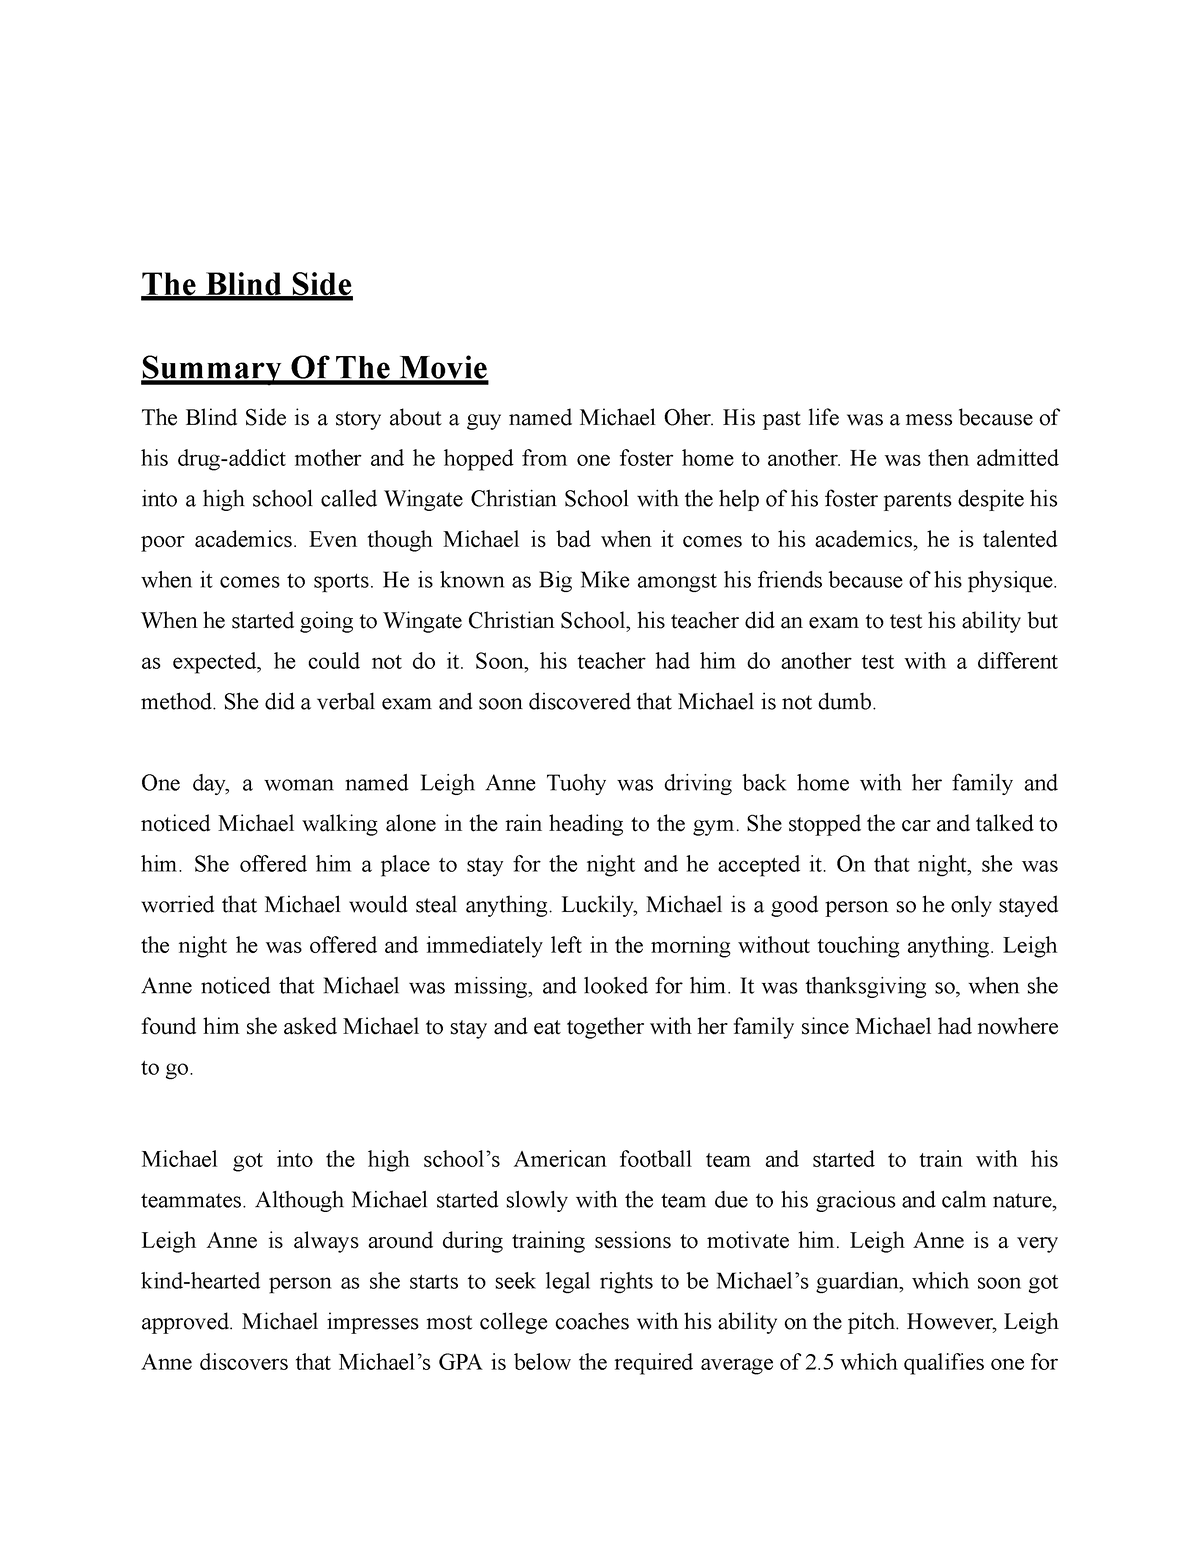 LAW034 Movie Analysis - The Blind Side Summary Of The Movie The Blind Side  is a story about a guy - Studocu